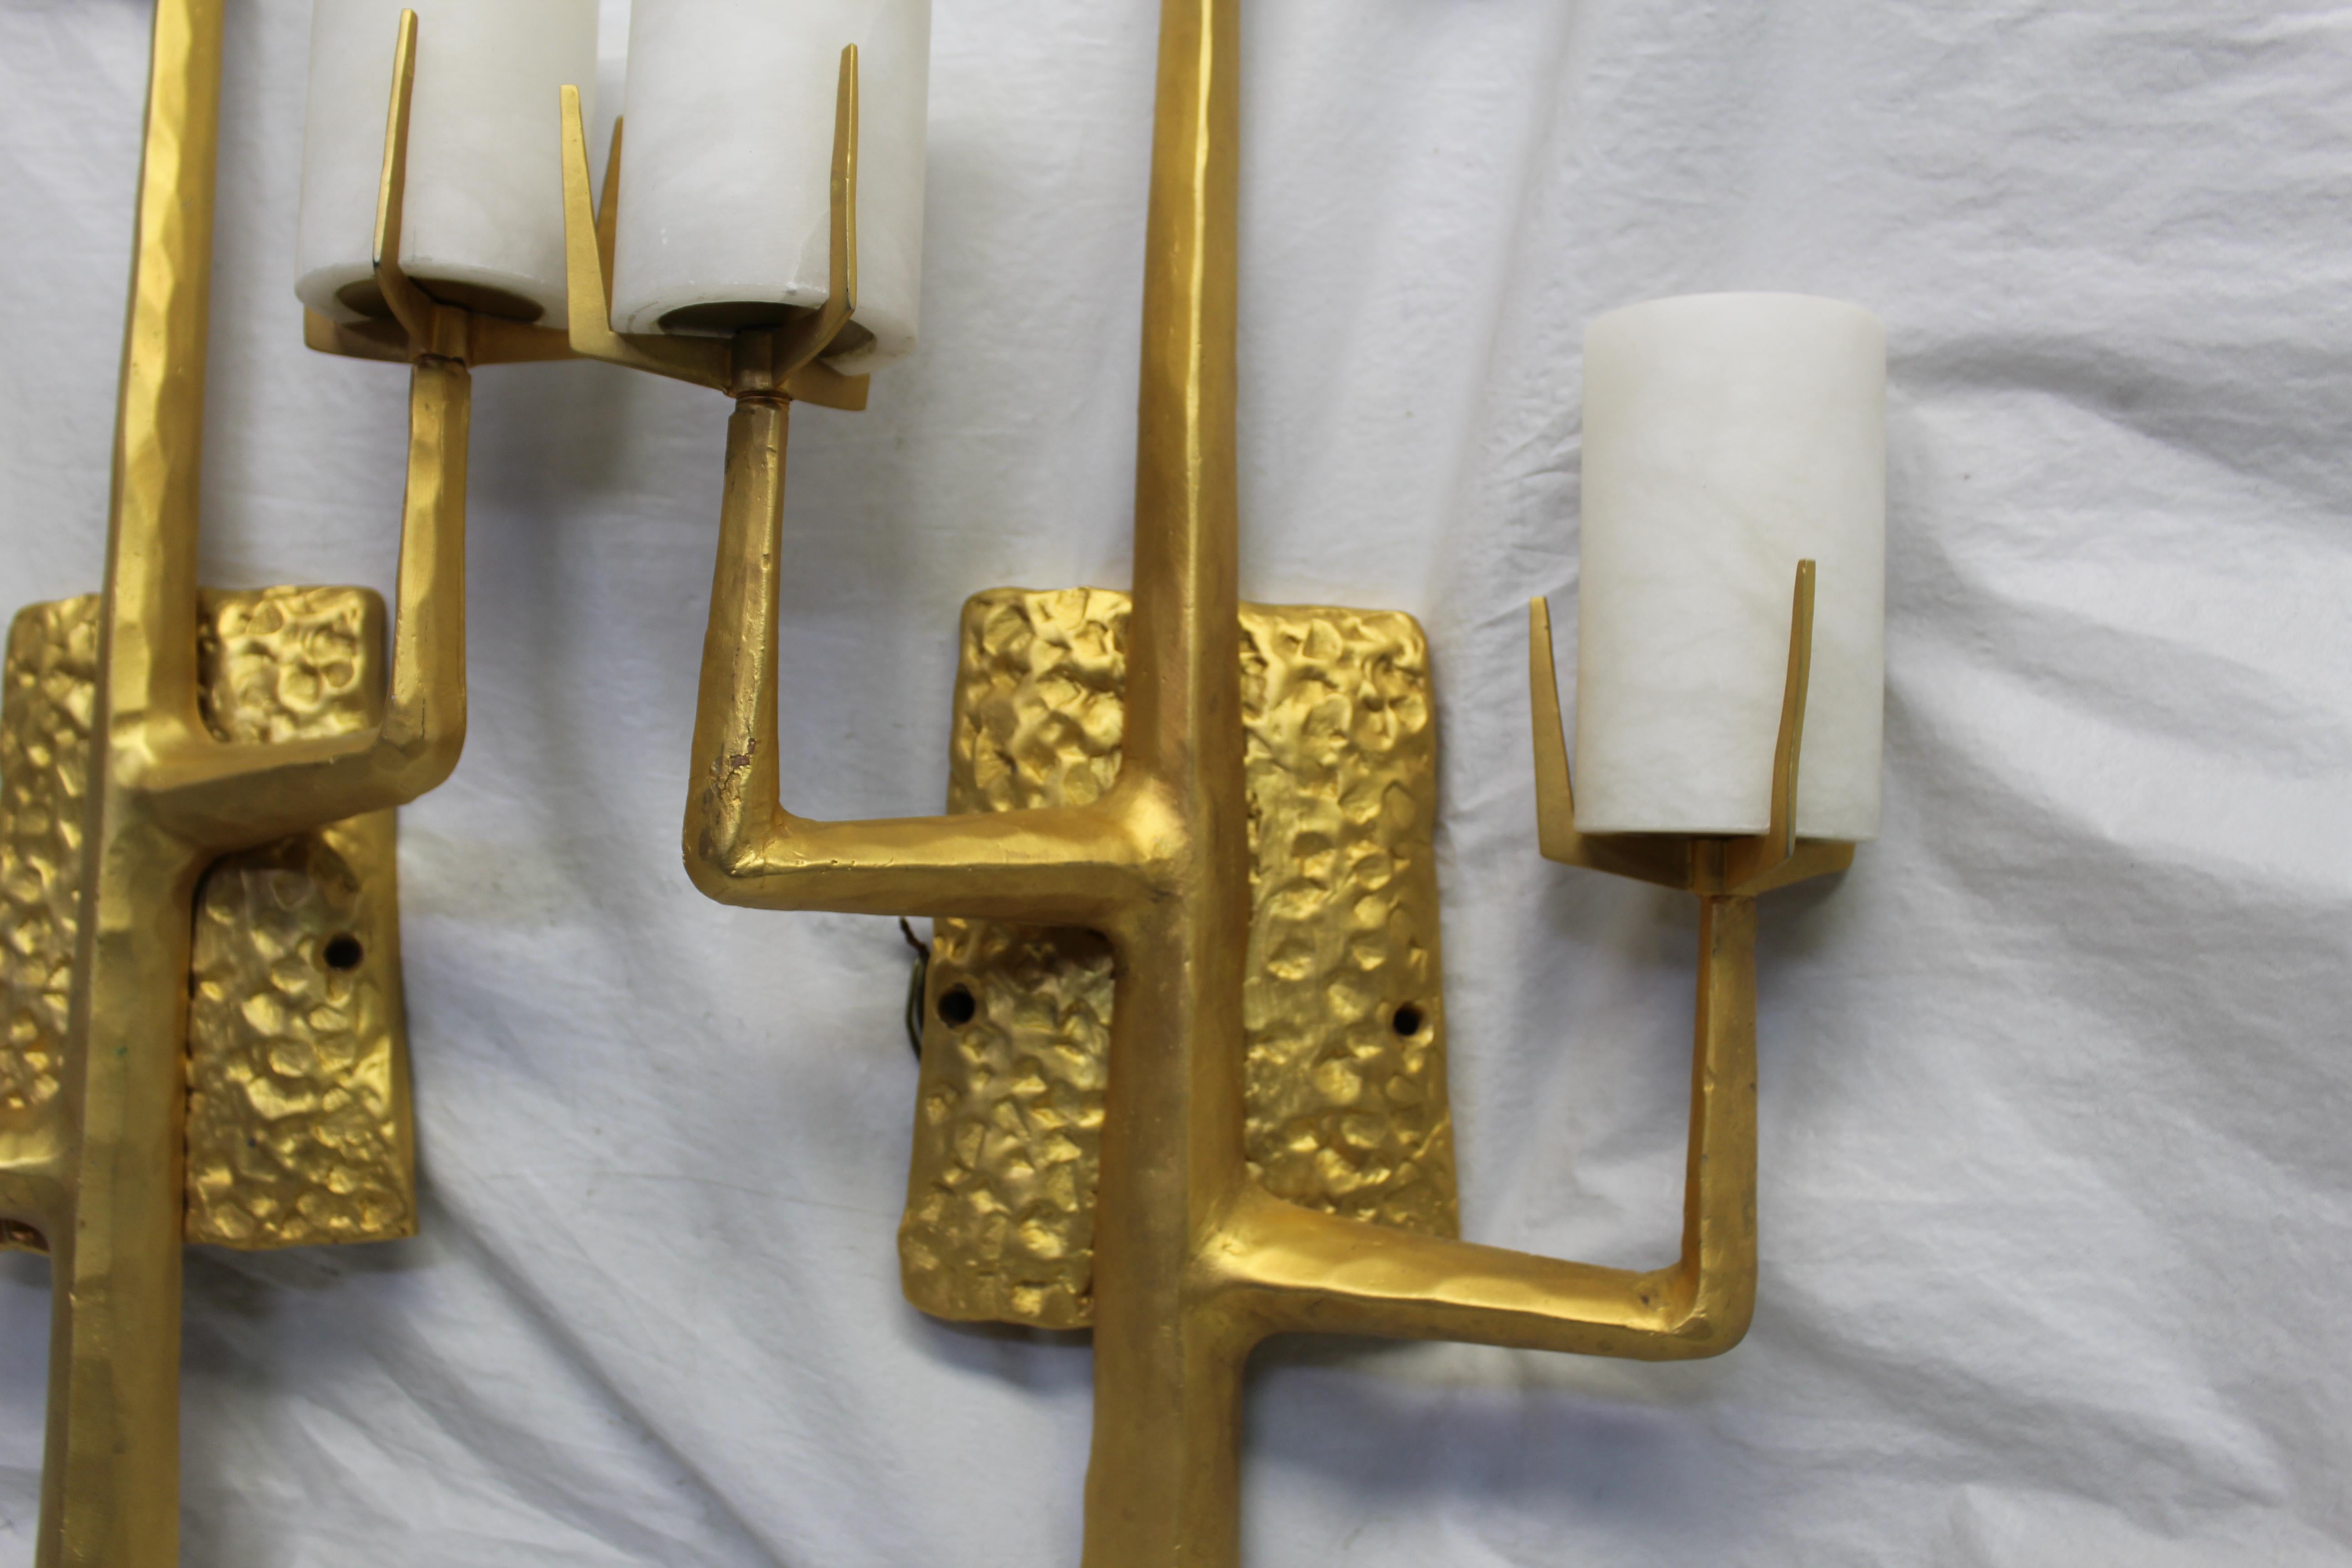 Pair of organic tree sconces, cast in bronze with alabaster shades. Finished in 18-karat gold plate. After the style of Agostini. Midcentury design. Lost wax bronze castings. Alabaster from Spain.